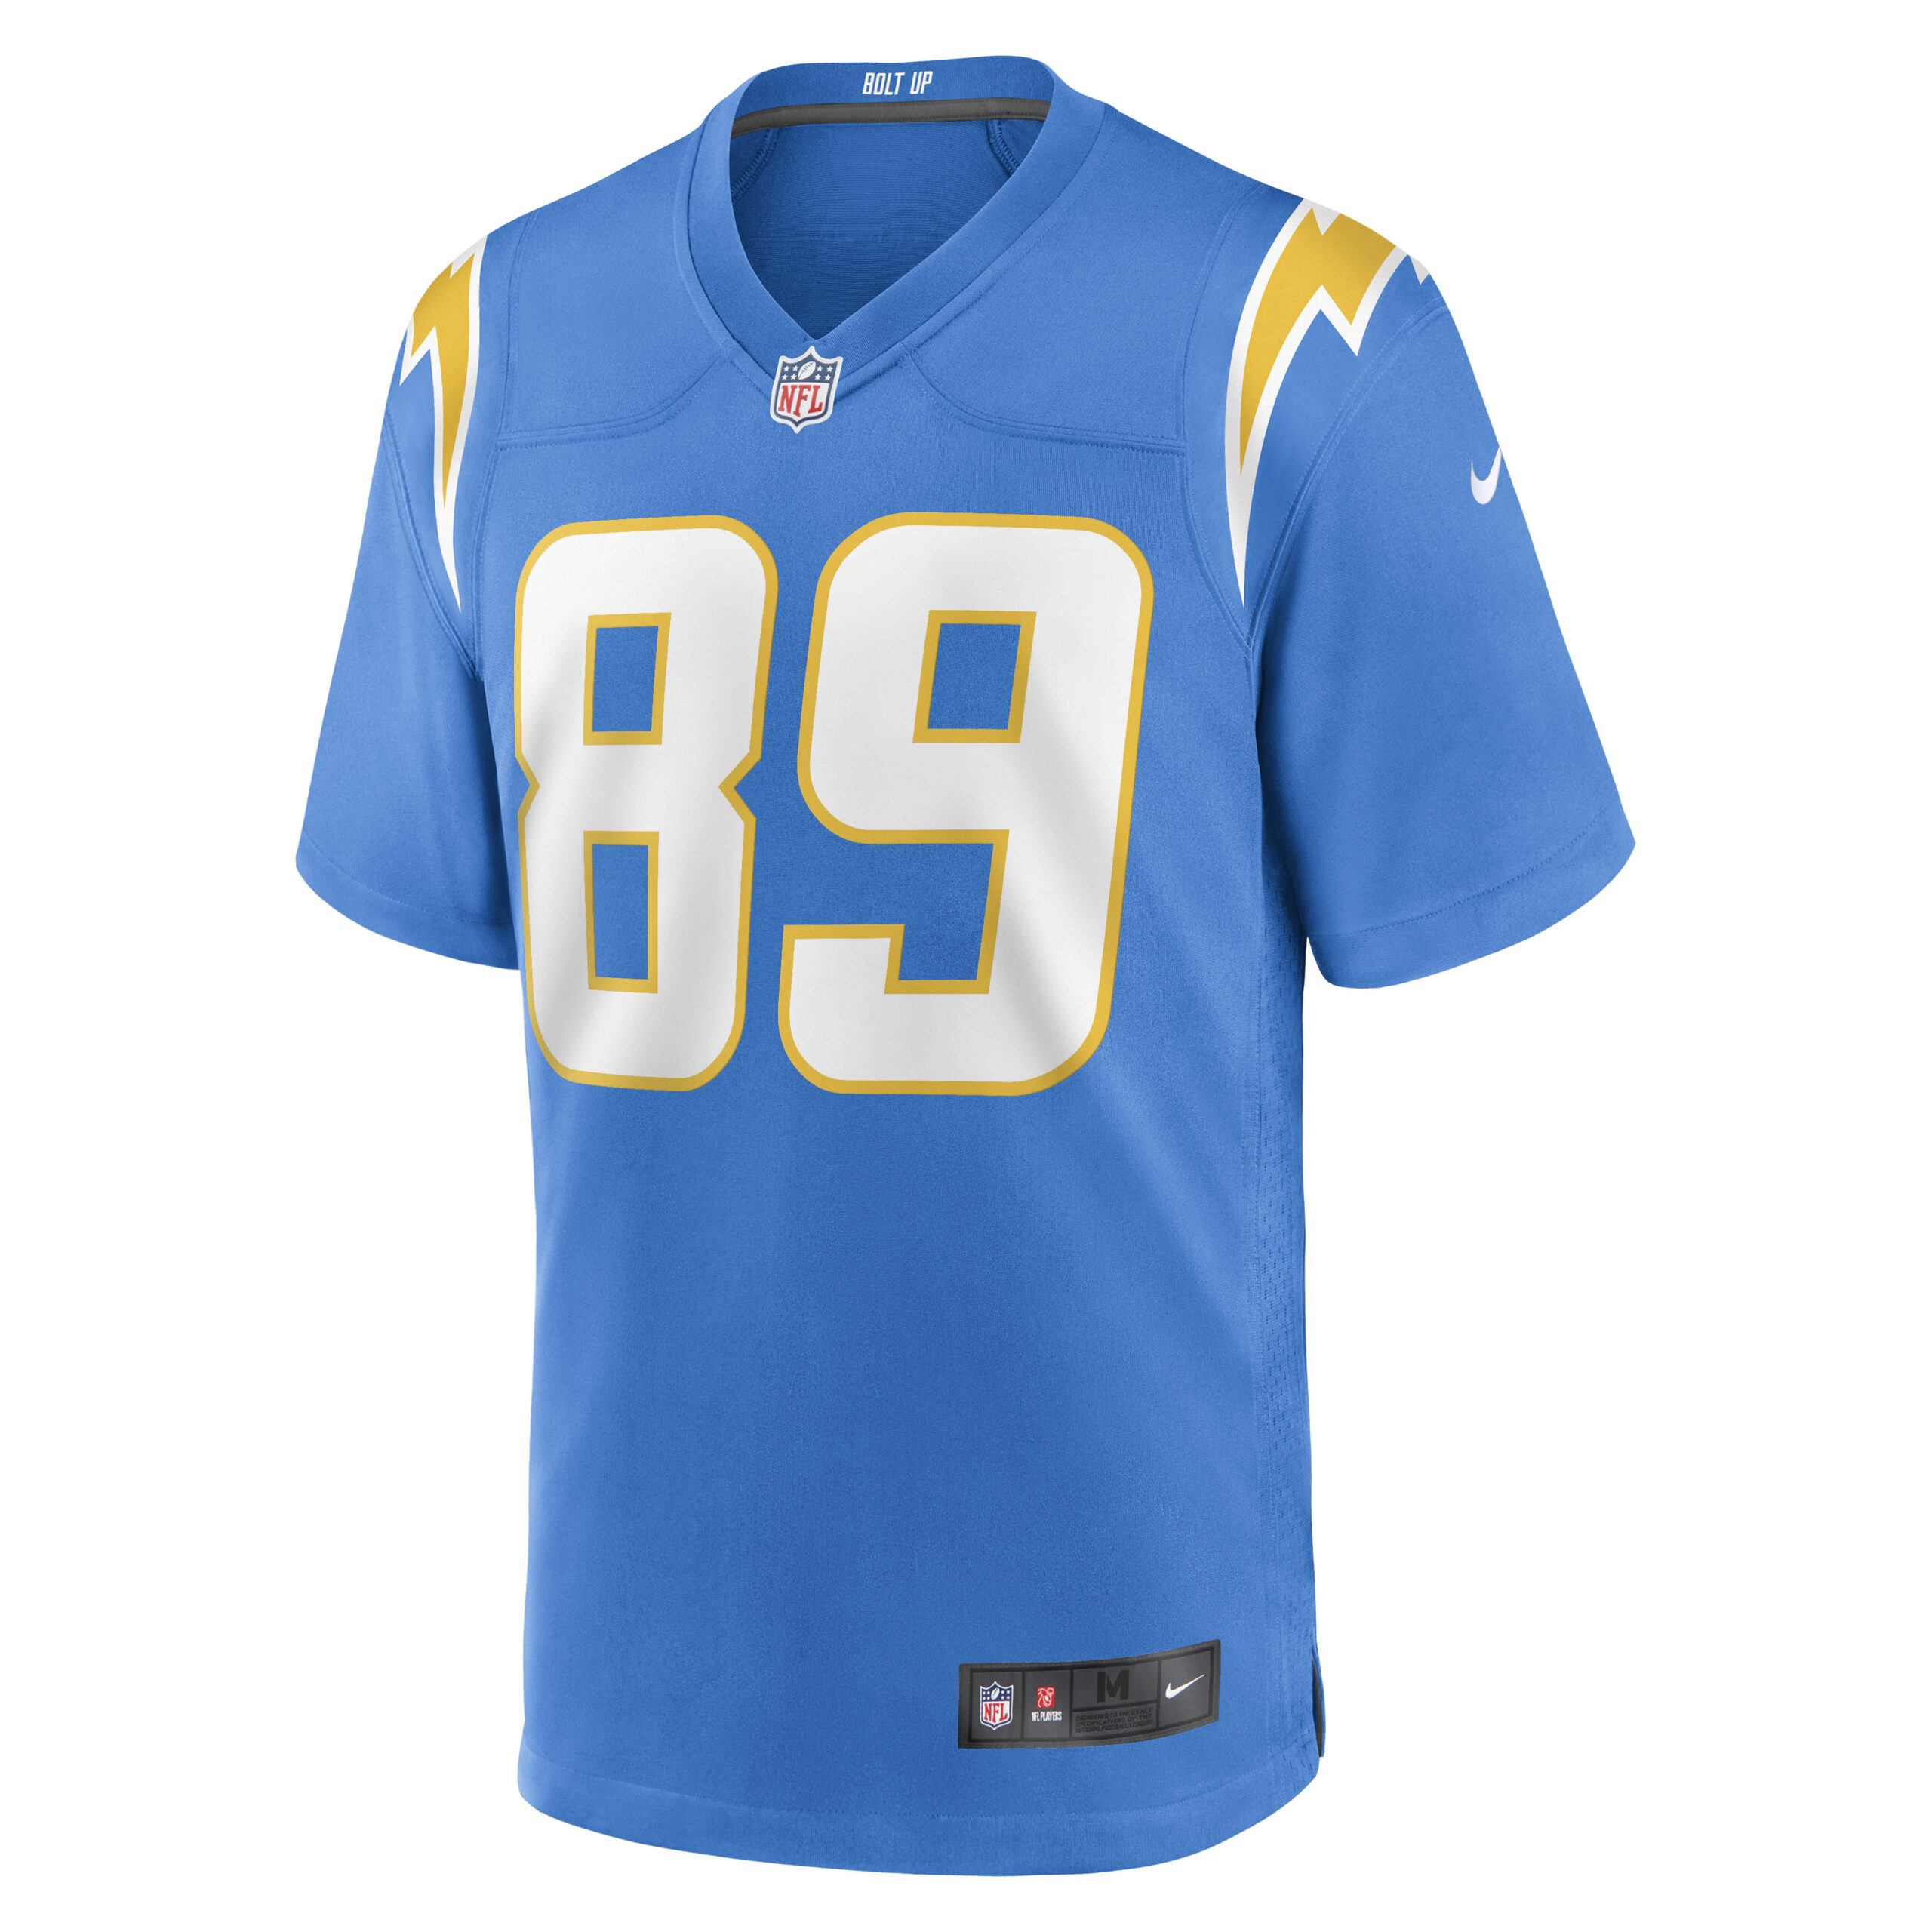 Men's Los Angeles Chargers Jerseys Powder Blue Wes Chandler Retired Player Style